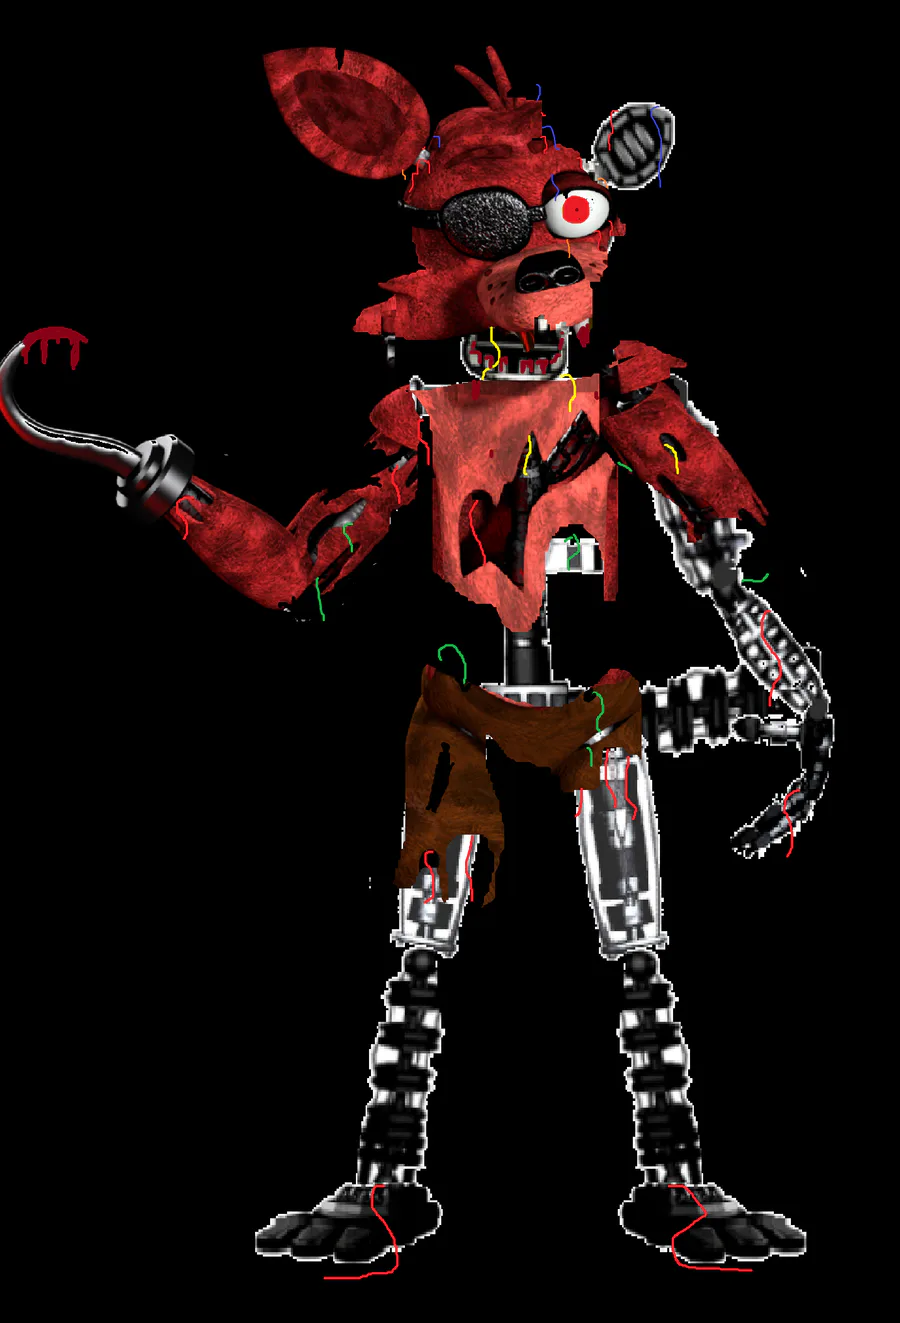 Rockstar_Foxy_And_pickles on Game Jolt: My withered Foxy